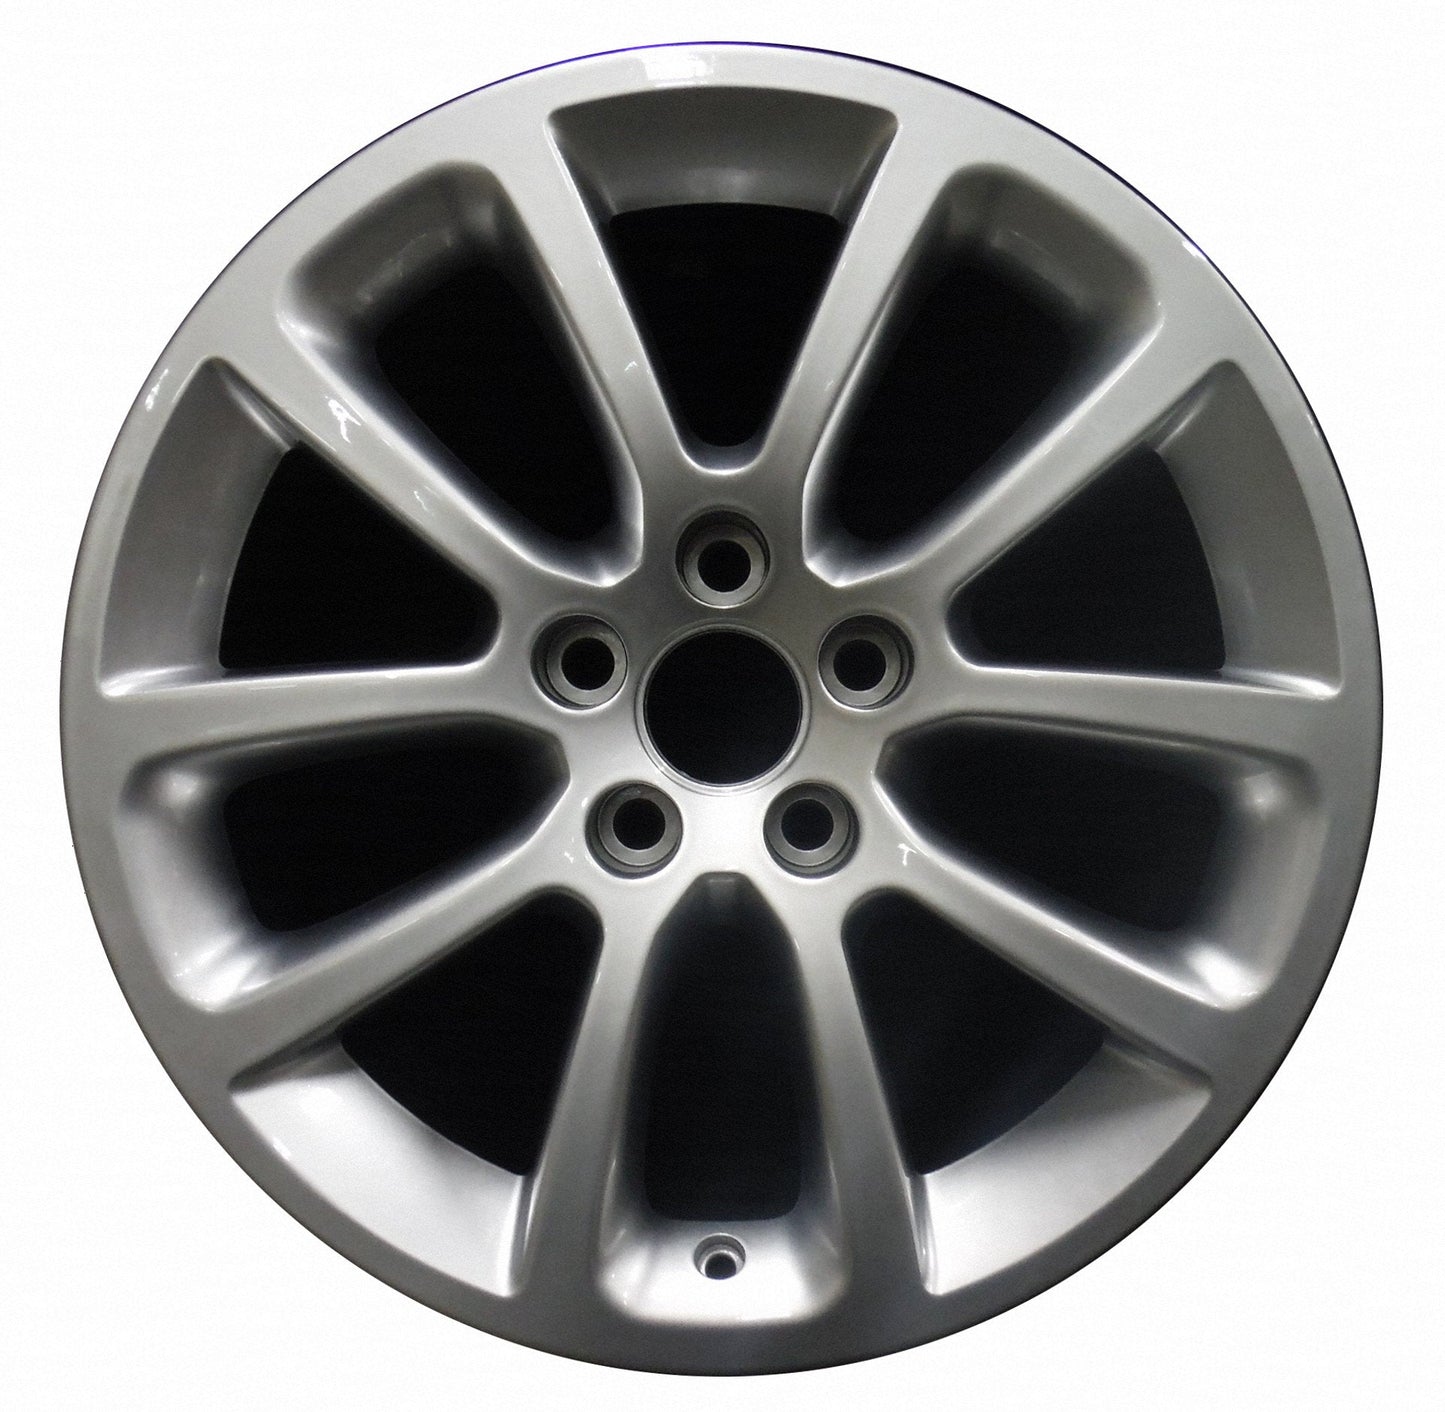 Ford Fusion  2008, 2009, 2010 Factory OEM Car Wheel Size 18x7.5 Alloy WAO.3705.LS100V2.FF